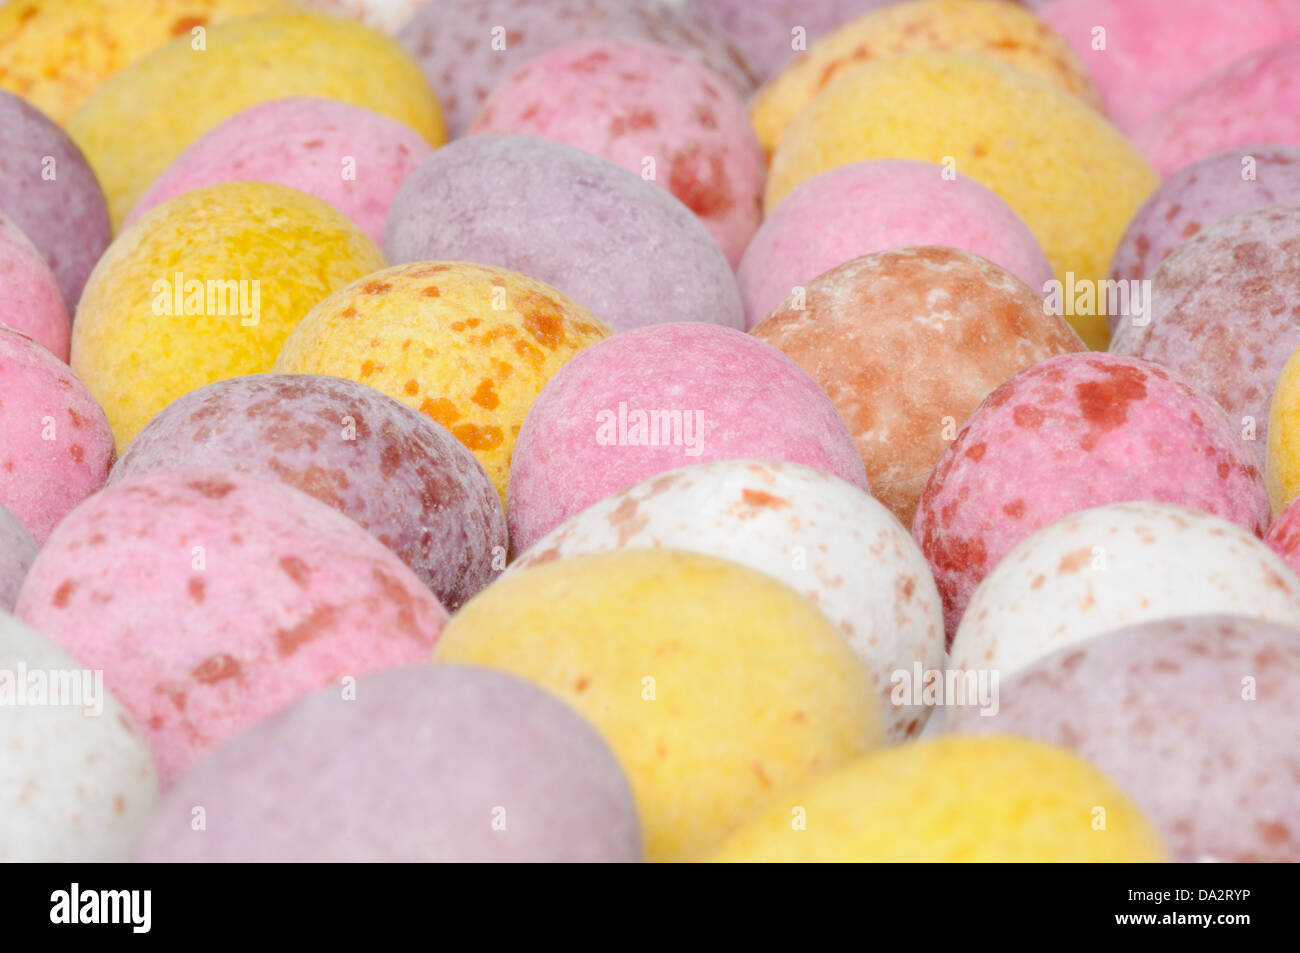 A shot of a pile of mini chocolate easter eggs on a plain white background. Stock Photo